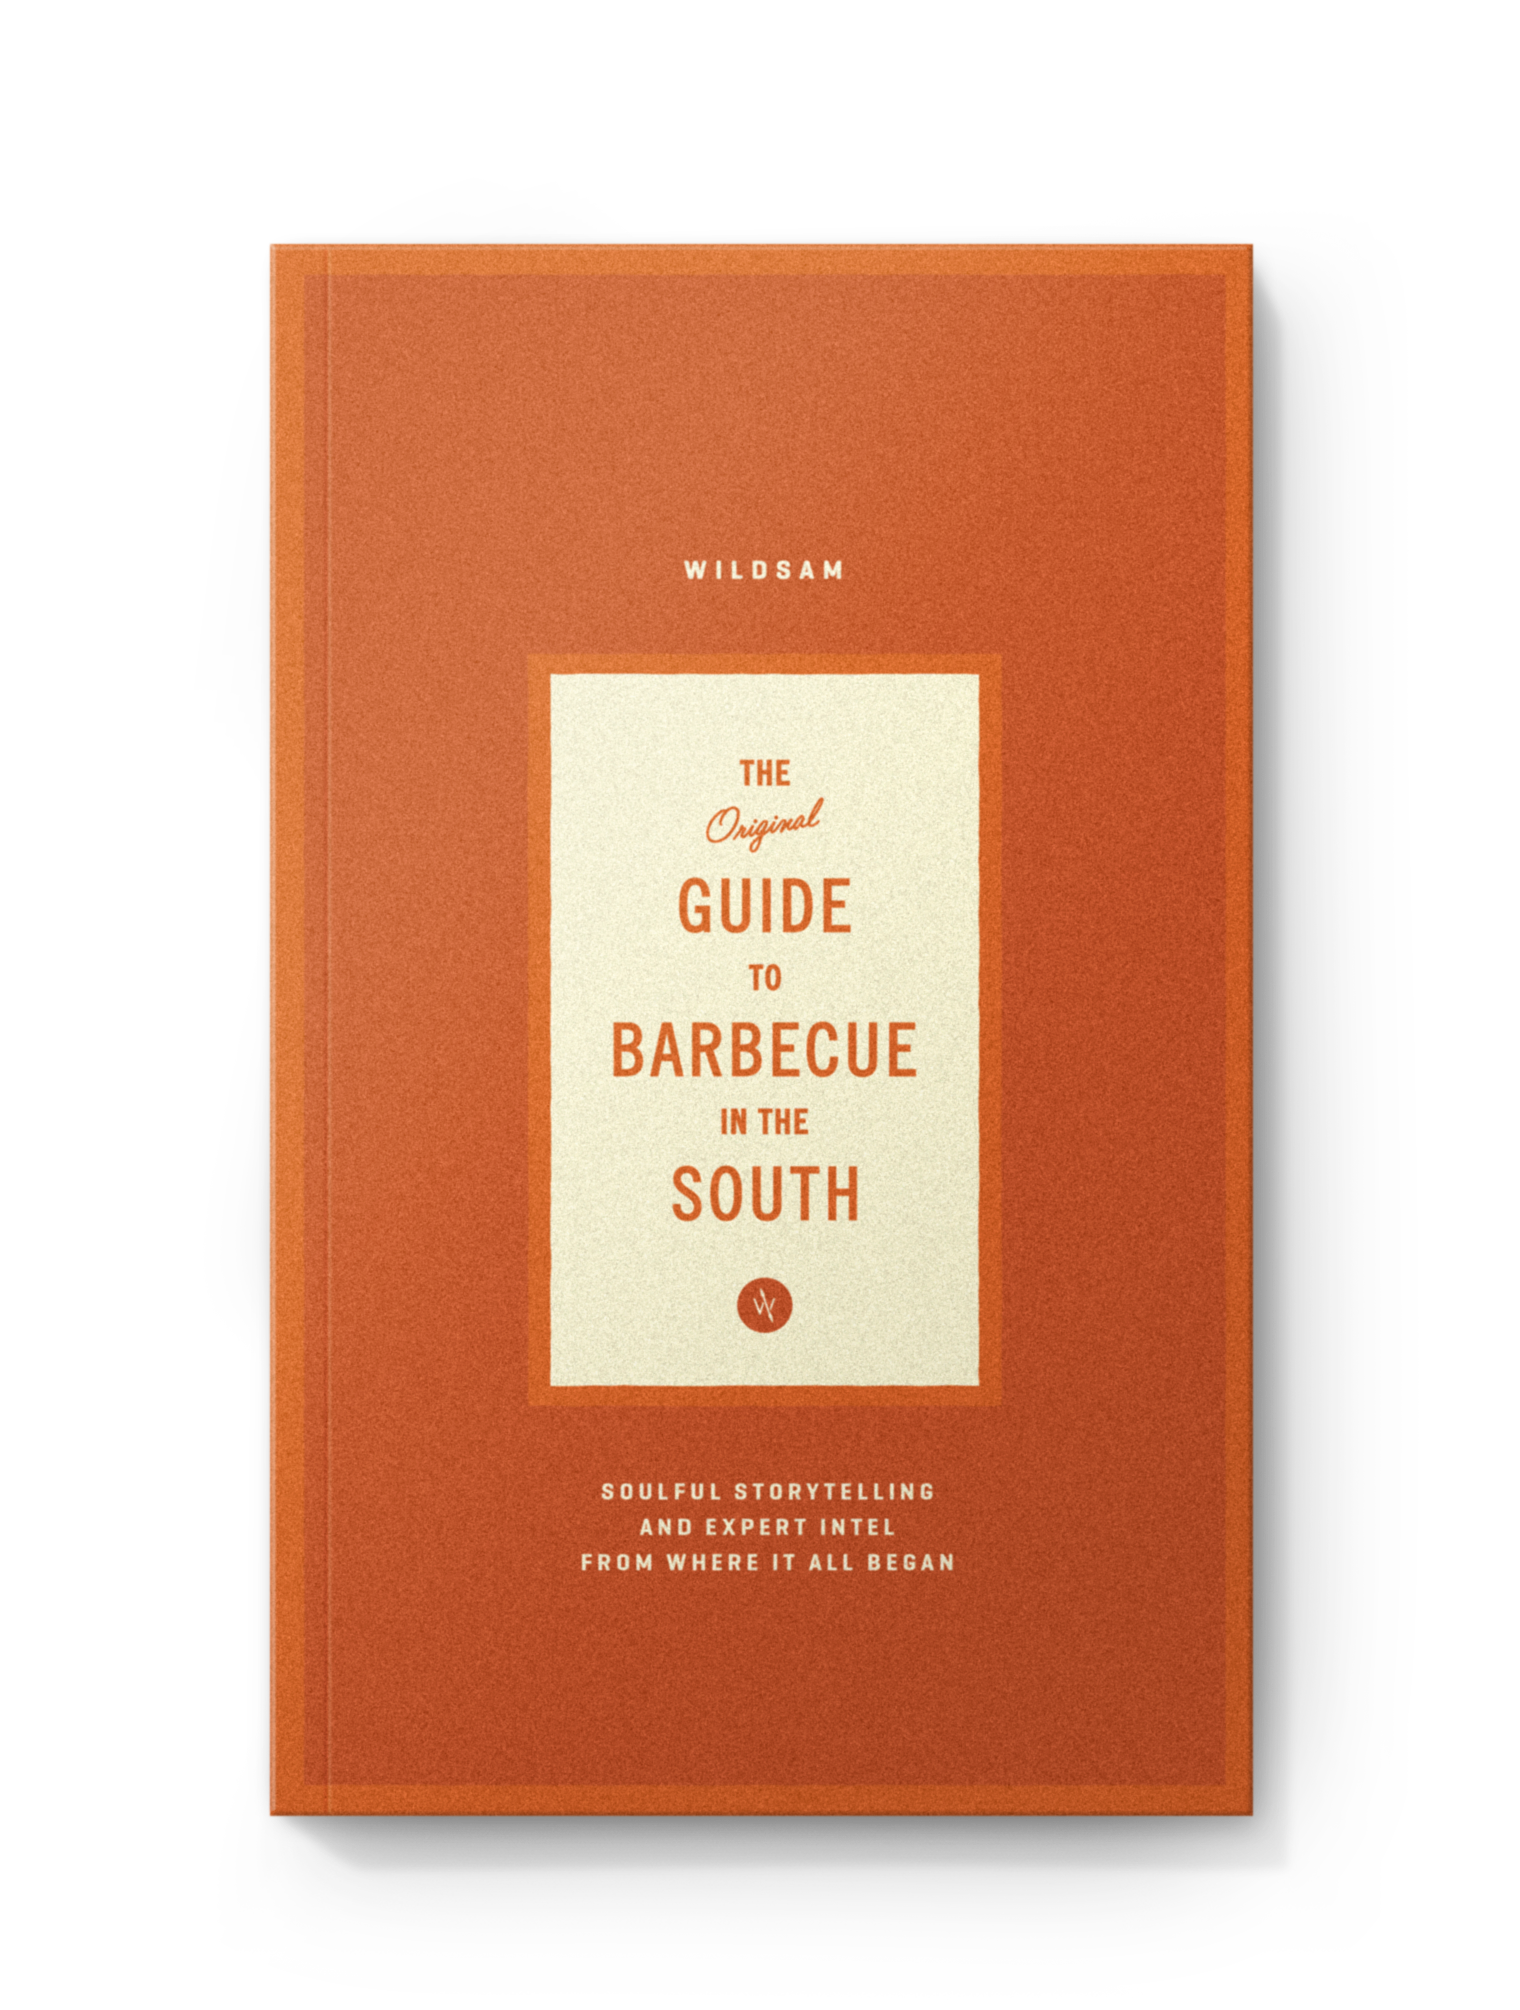 SOUTHERN BARBECUE